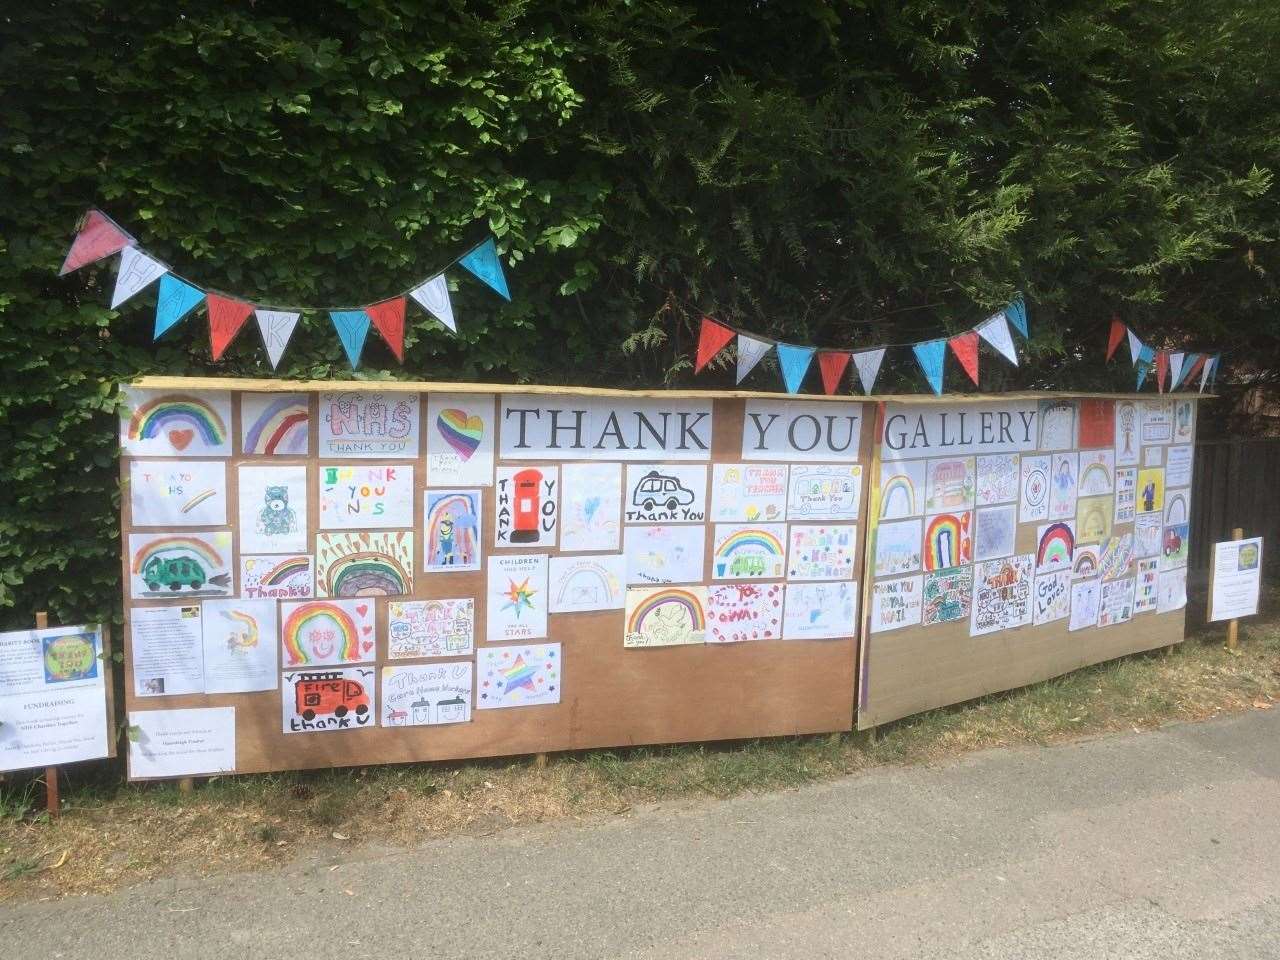 The thank you gallery for key workers is on the A229 in Staplehurst village centre